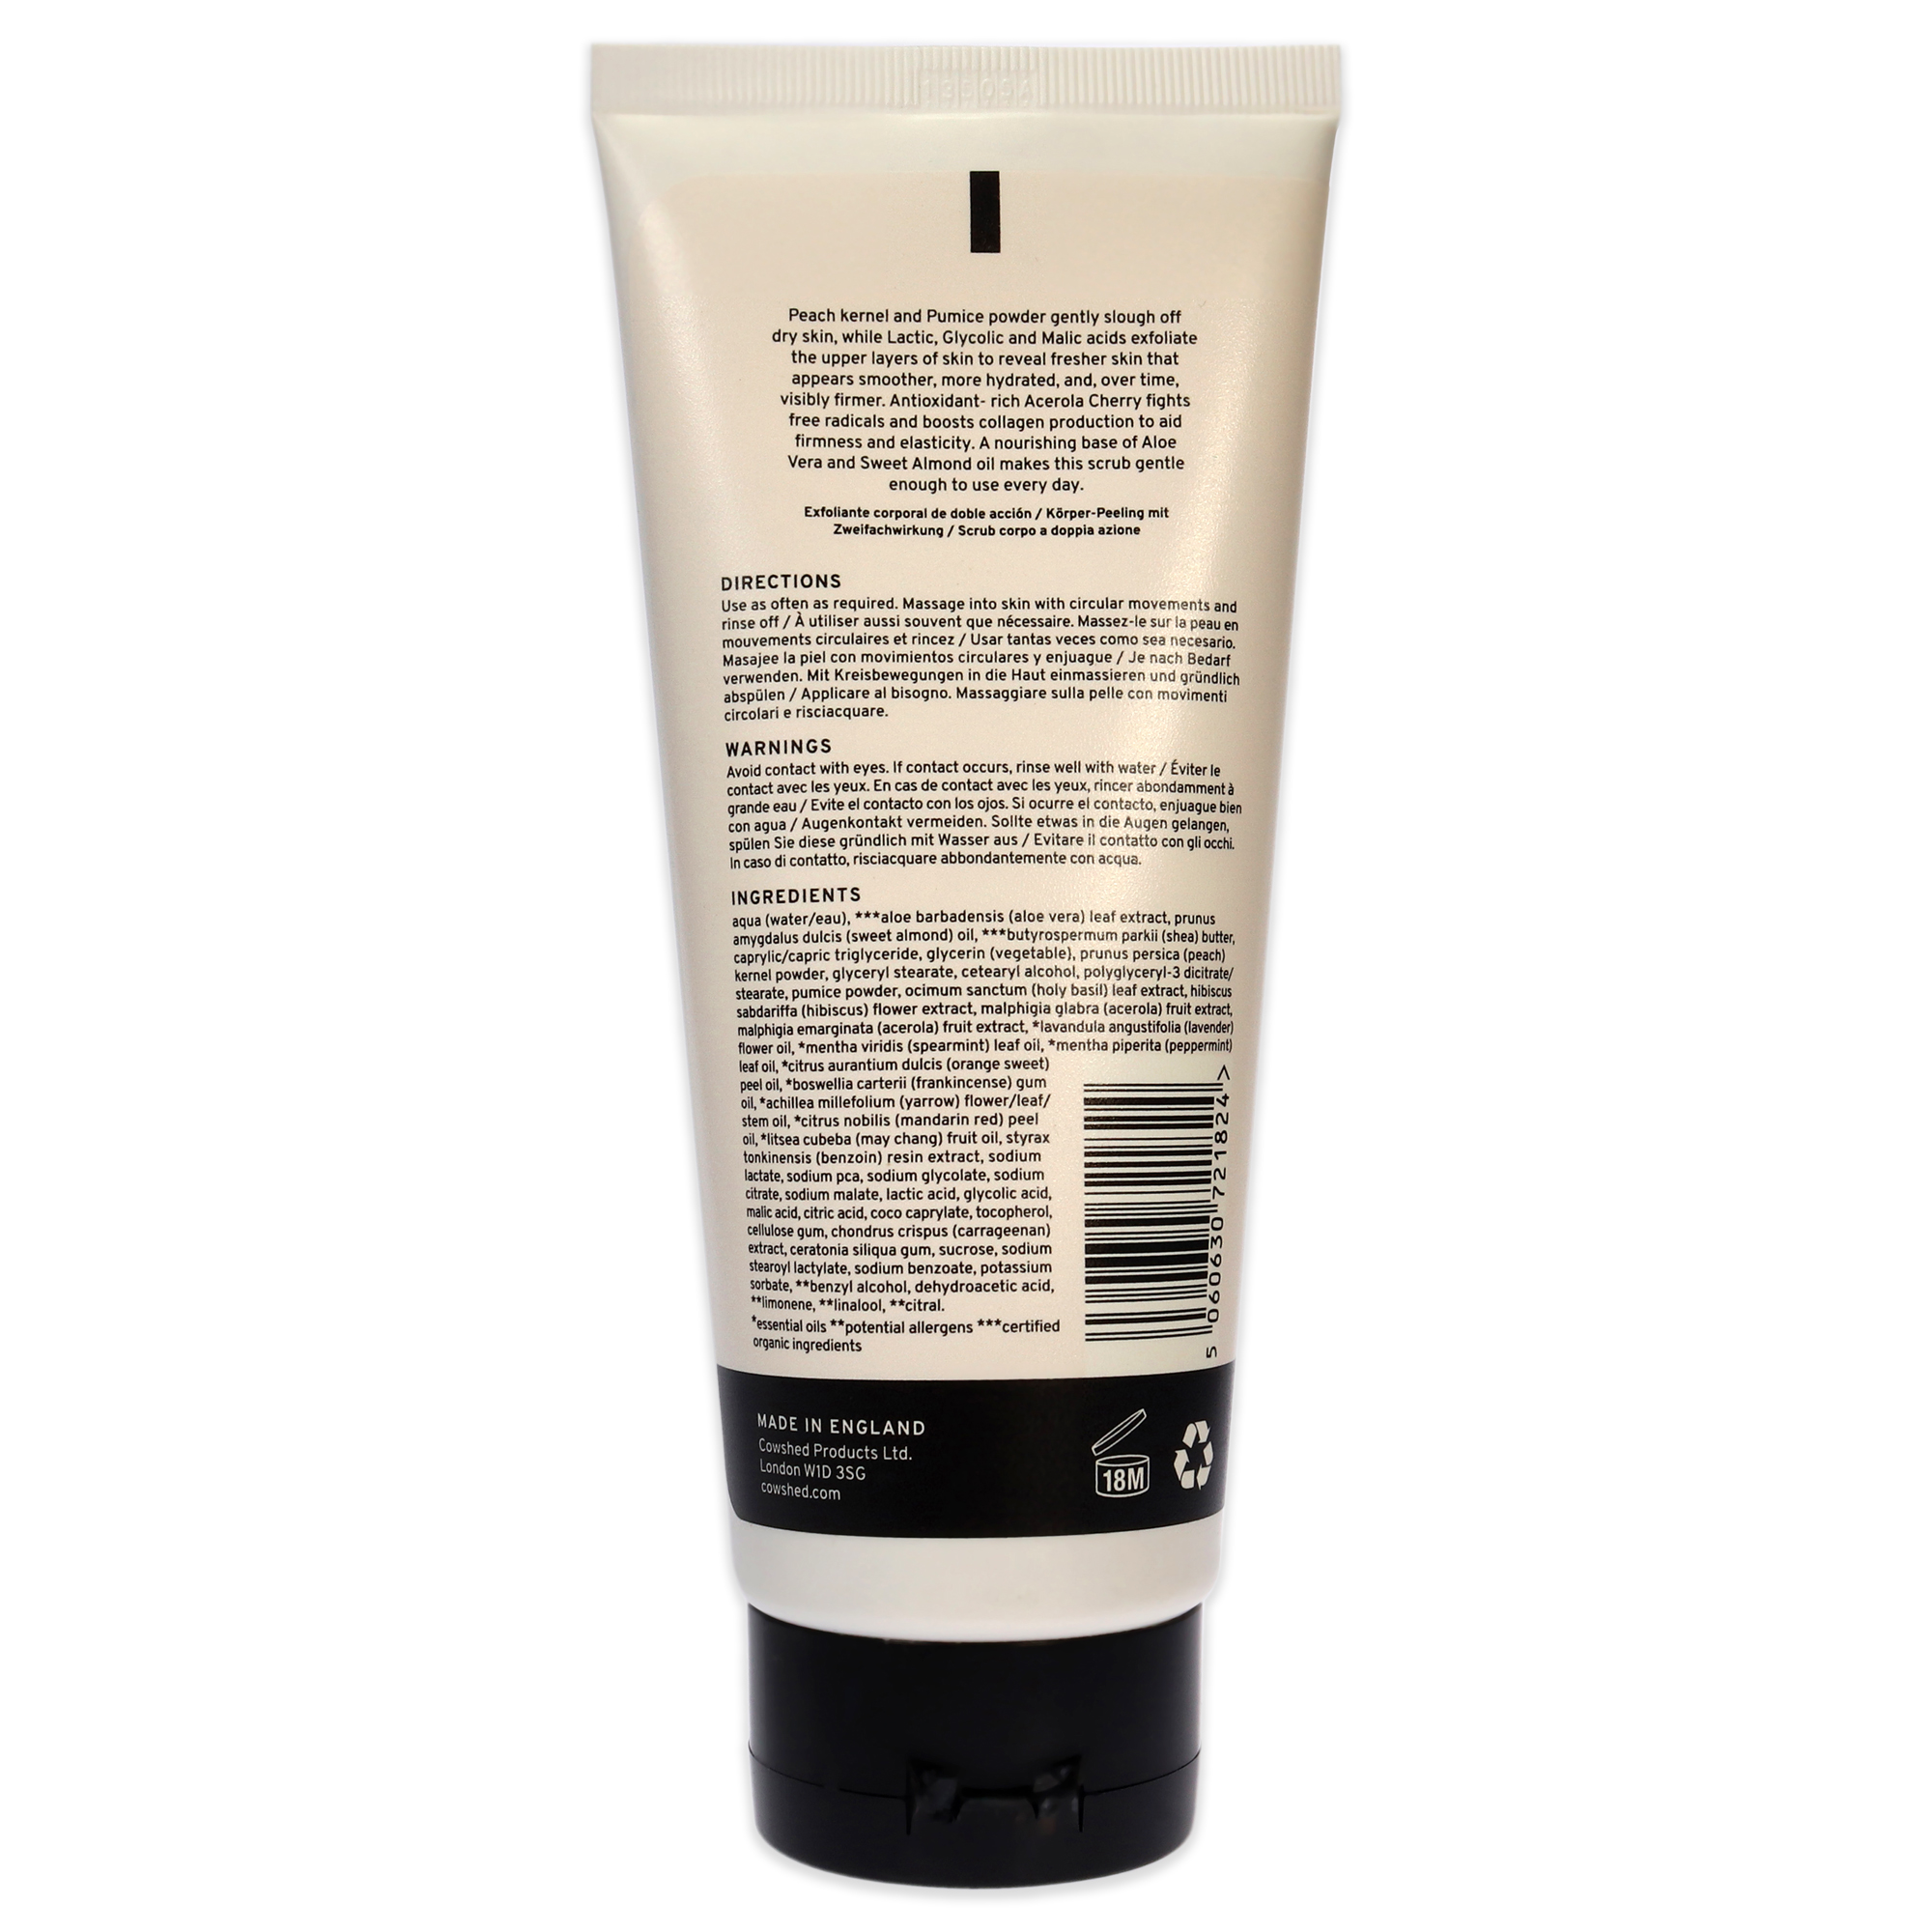 Cowshed Exfoliate Dual Action Body Scrub, 200 ml - image 4 of 4